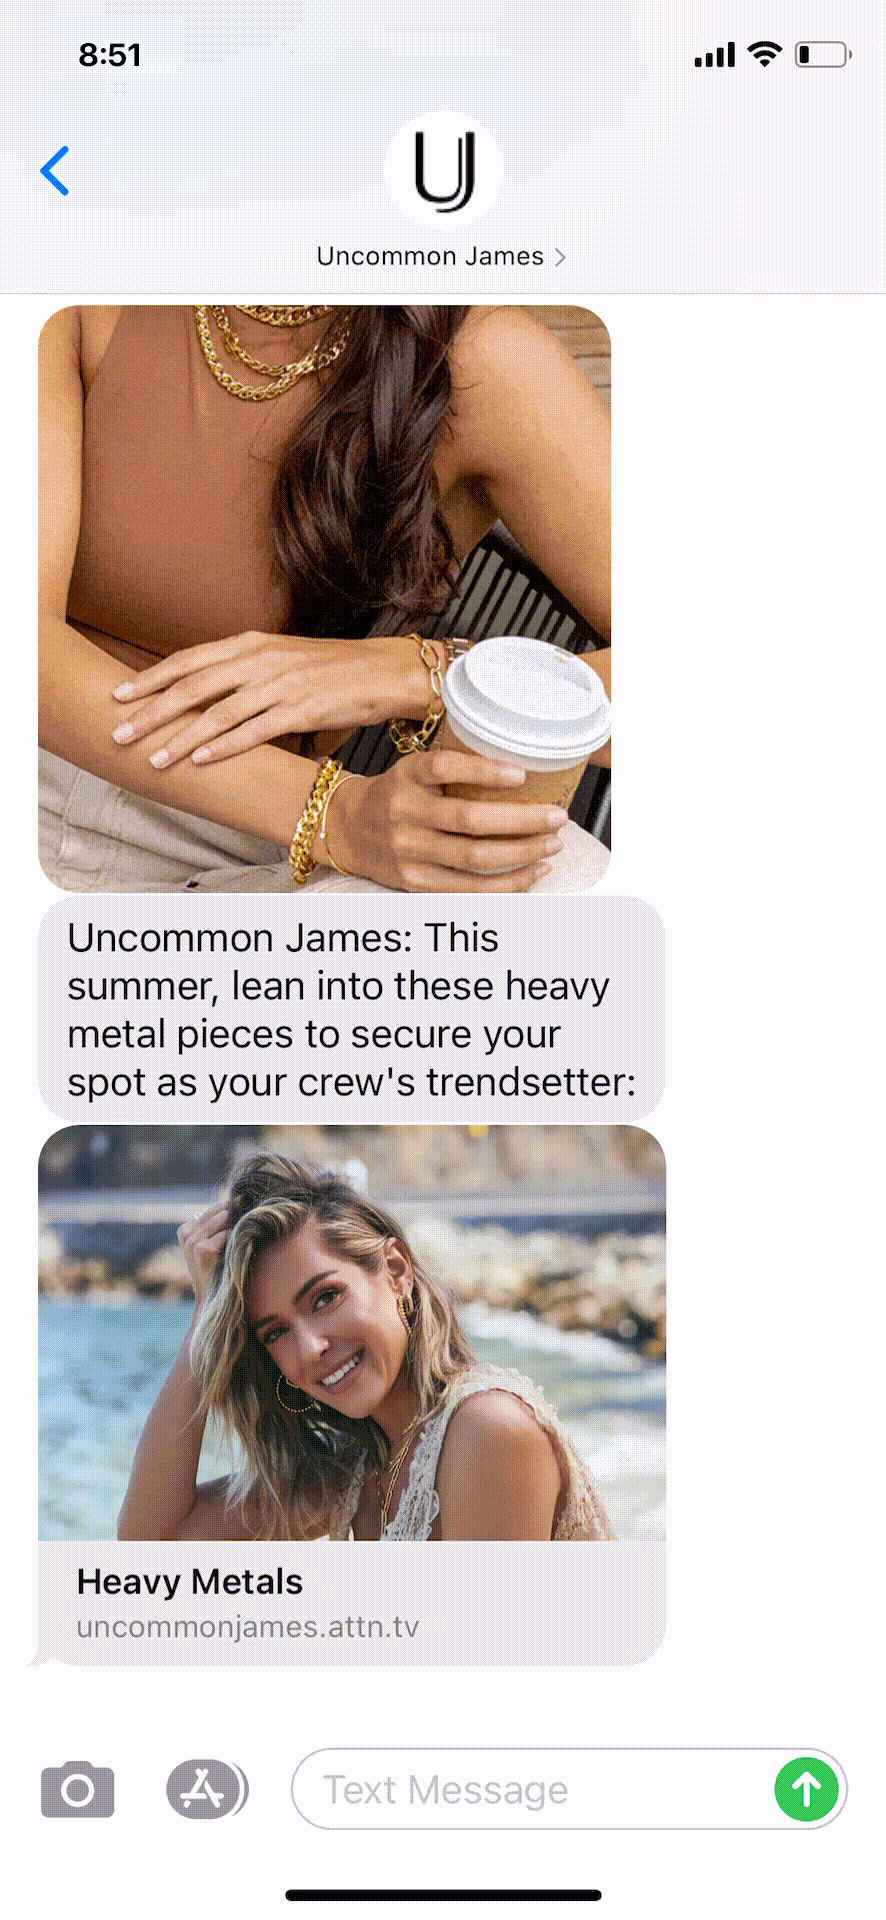 Uncommon-James-Text-Message-Marketing-Example-05.25.2021